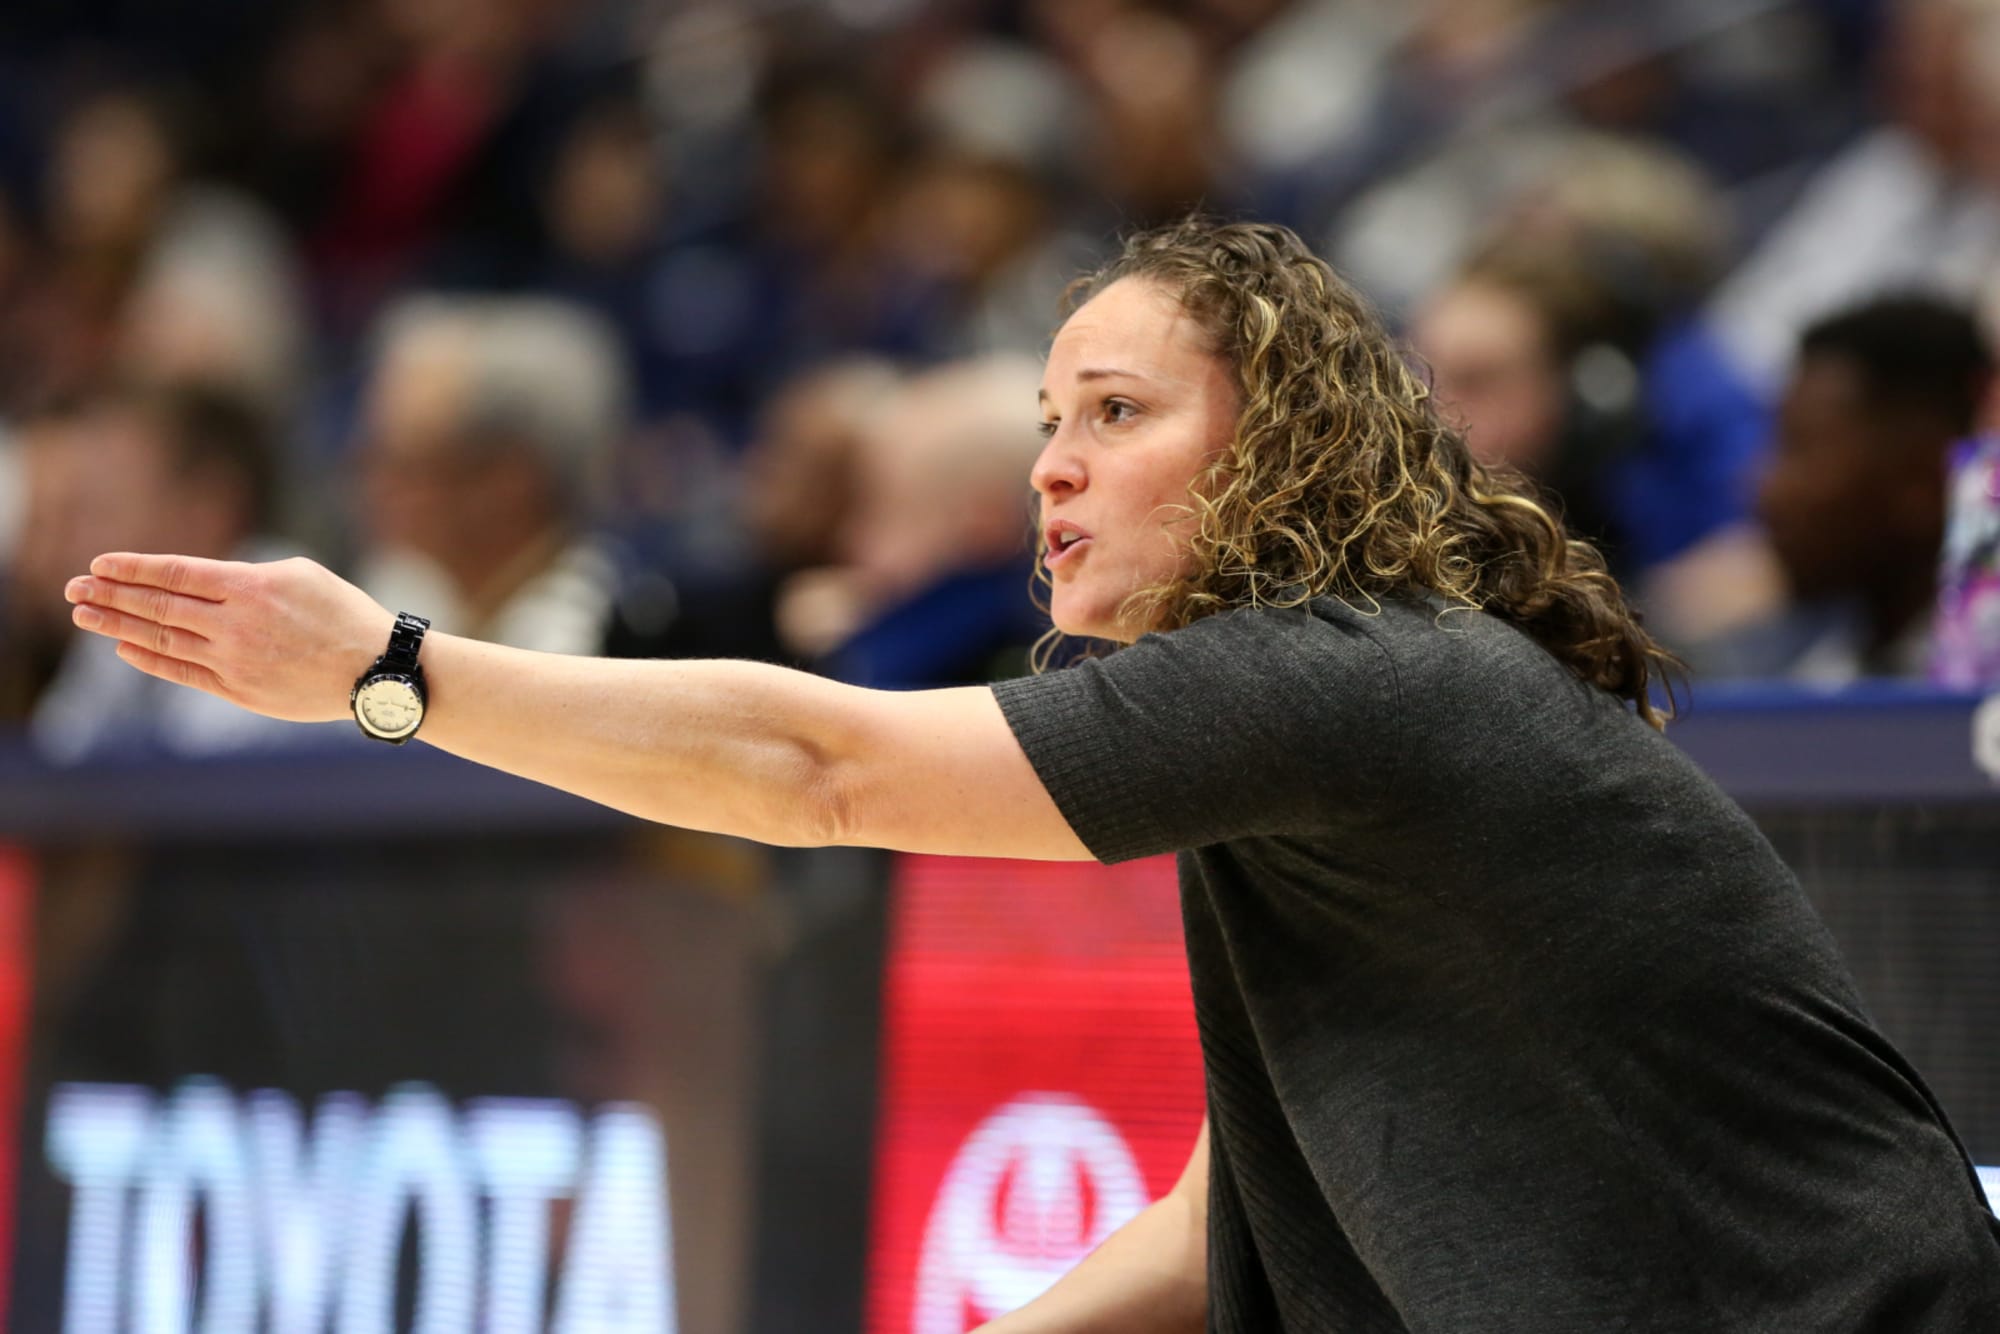 Women's basketball news: Three teams with questions to answer